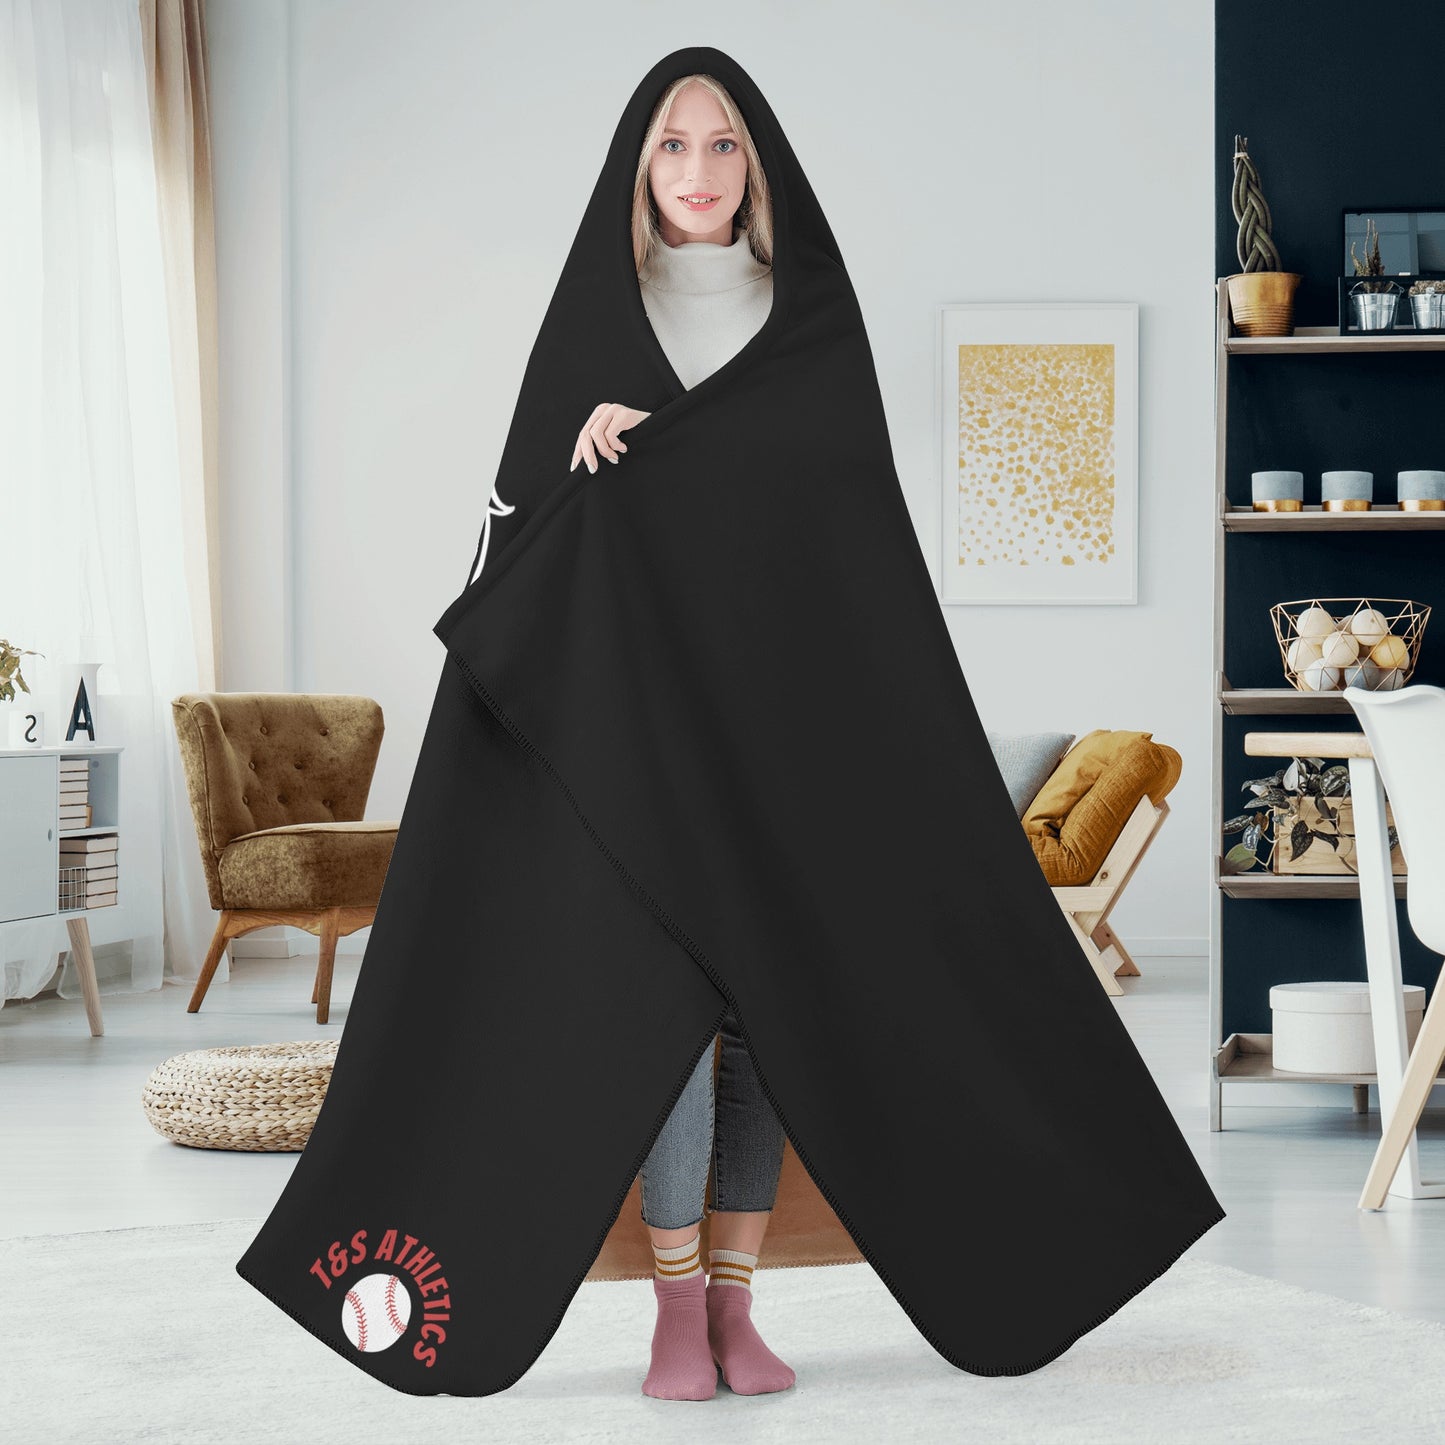 Winged Cross Hooded Blanket (FREE SHIPPING)